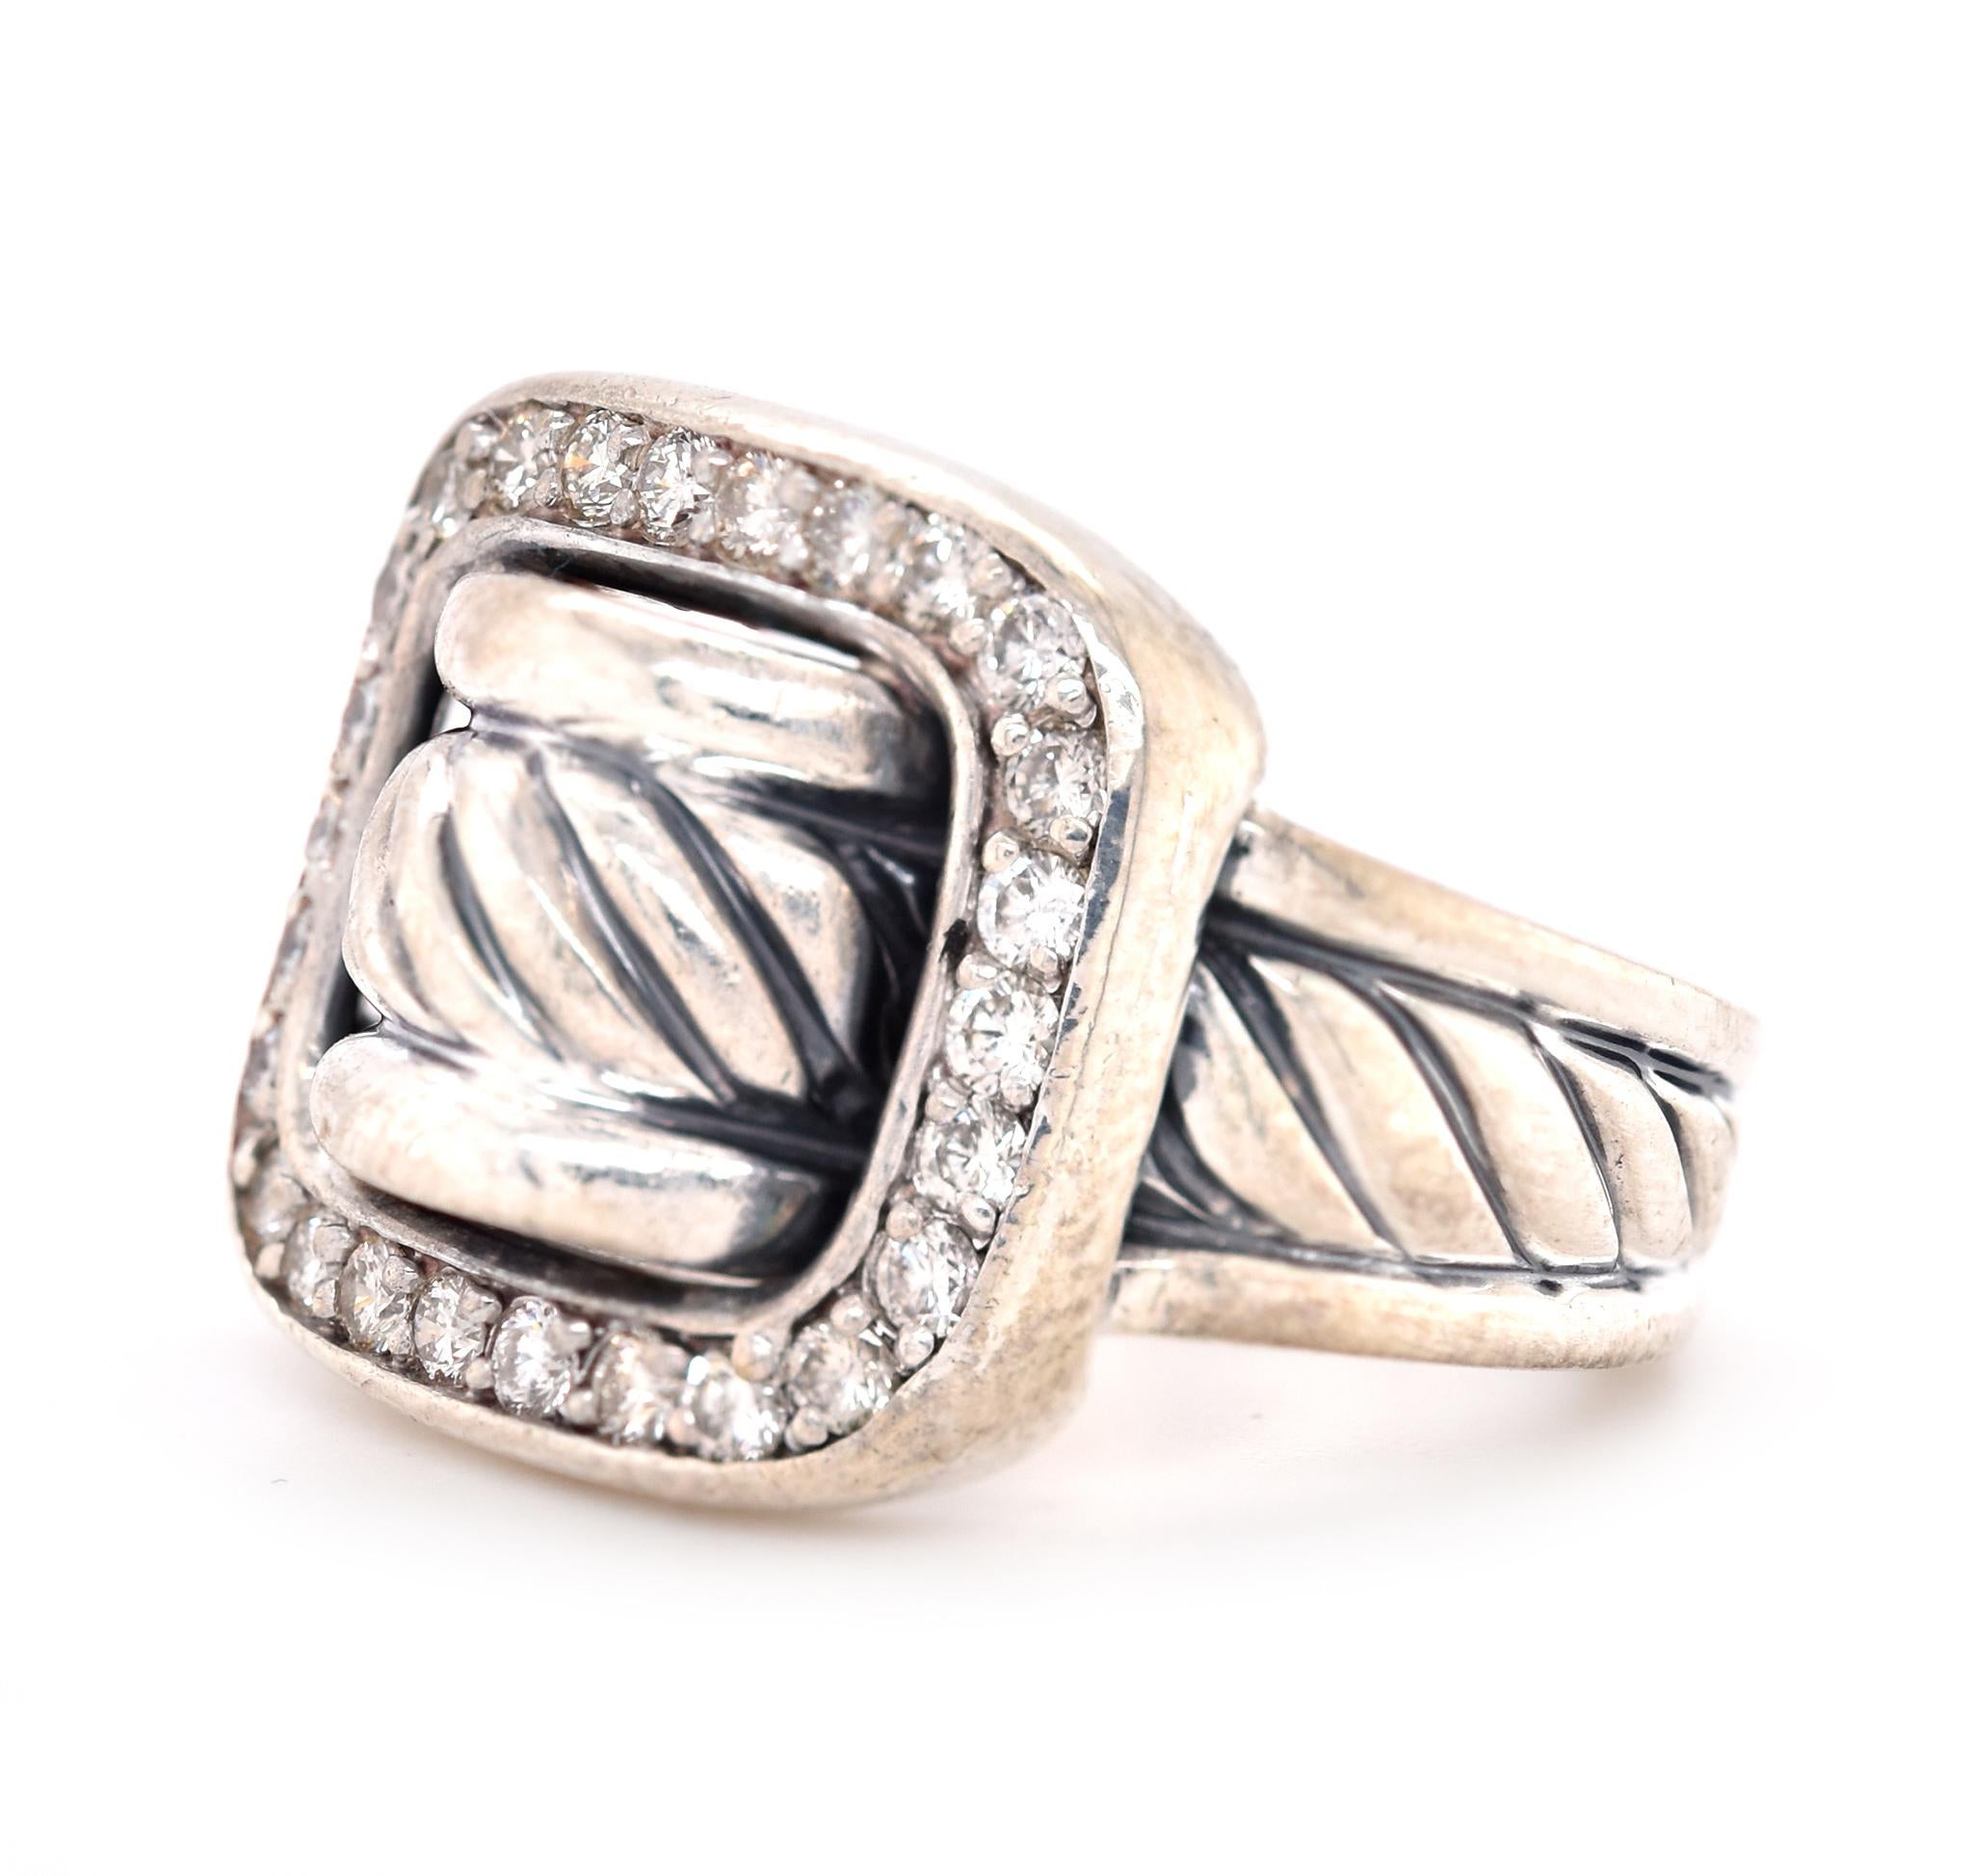 Designer: David Yurman
Material: sterling silver 
Diamond: 26 round cut = .65cttw
Color: G
Clarity: VS2
Weight: 12.28 grams
Measurement: ring top measures 16.8mm wide
Size: 7
